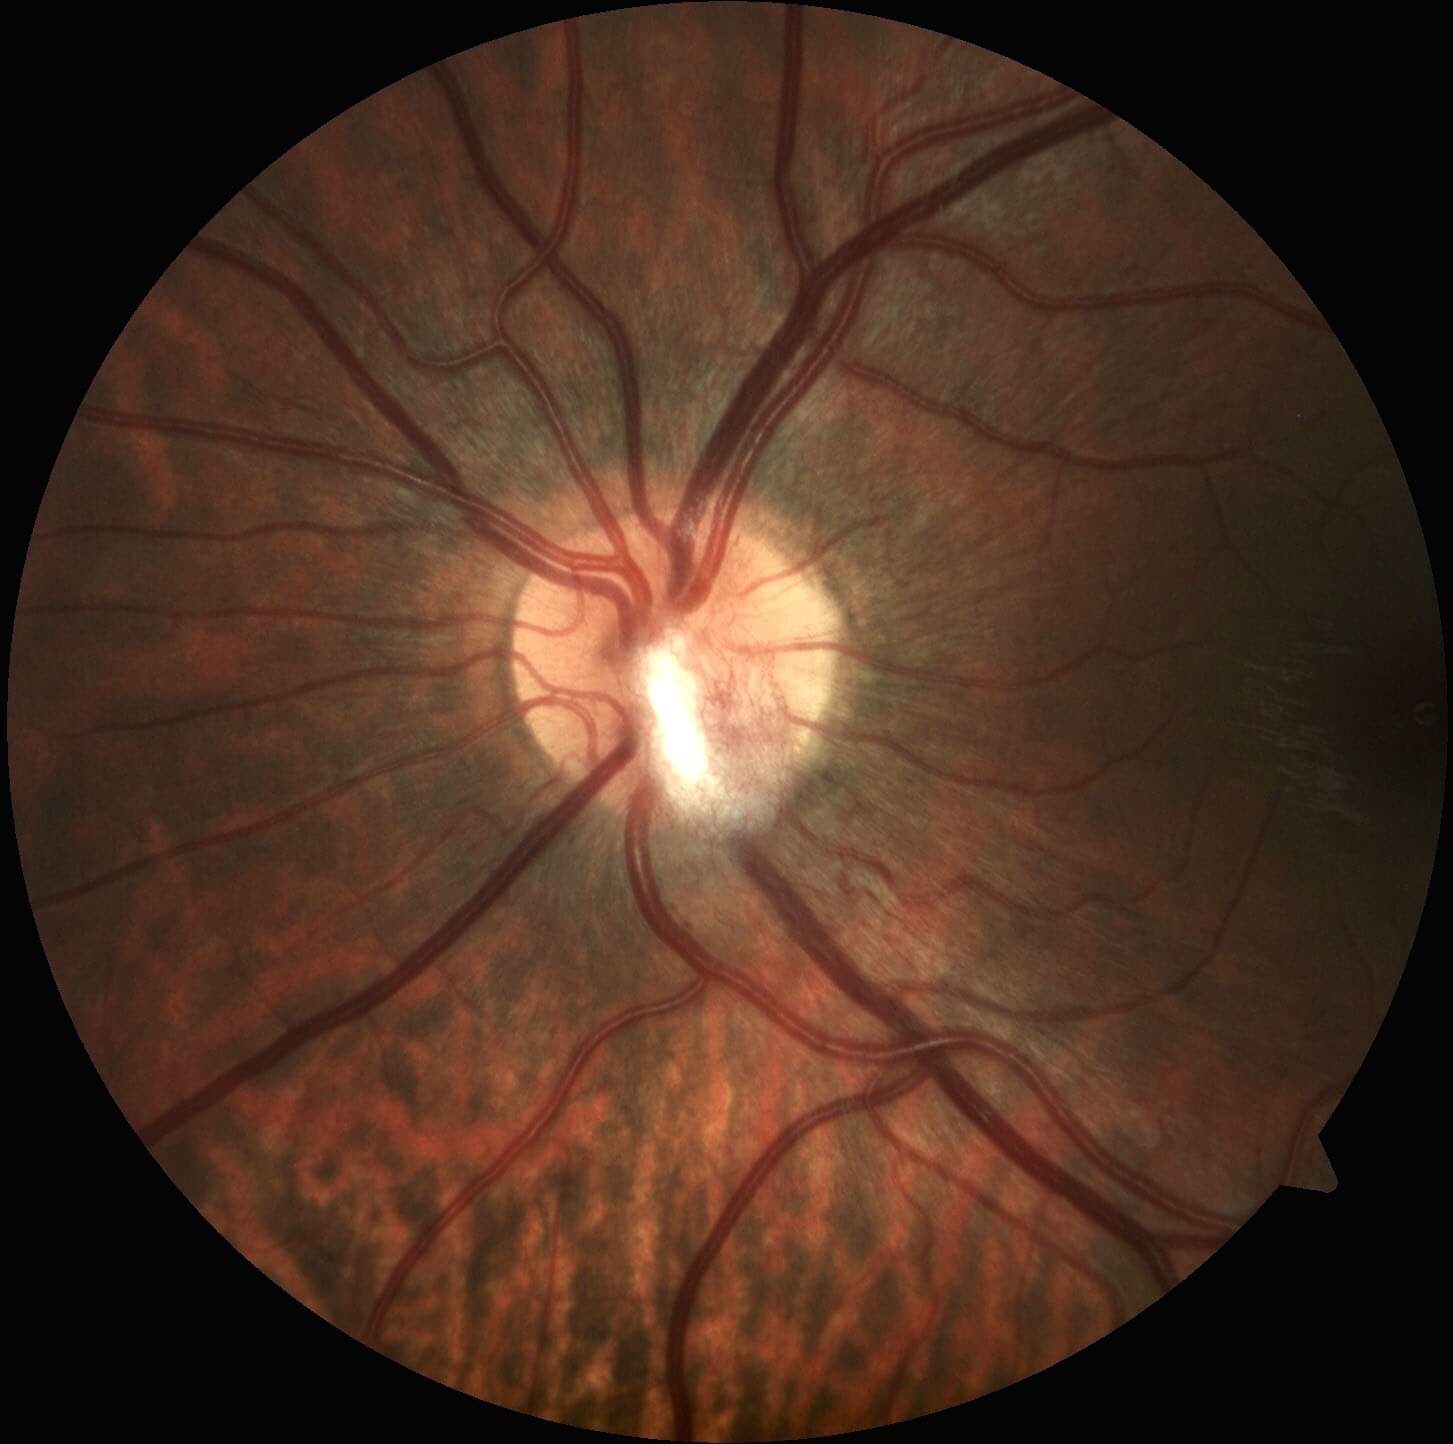 Colour fundus photography of the left eye in the patient’s daughter demonstrates a retinal capillary haemangioblastoma emanating from the optic nerve head.